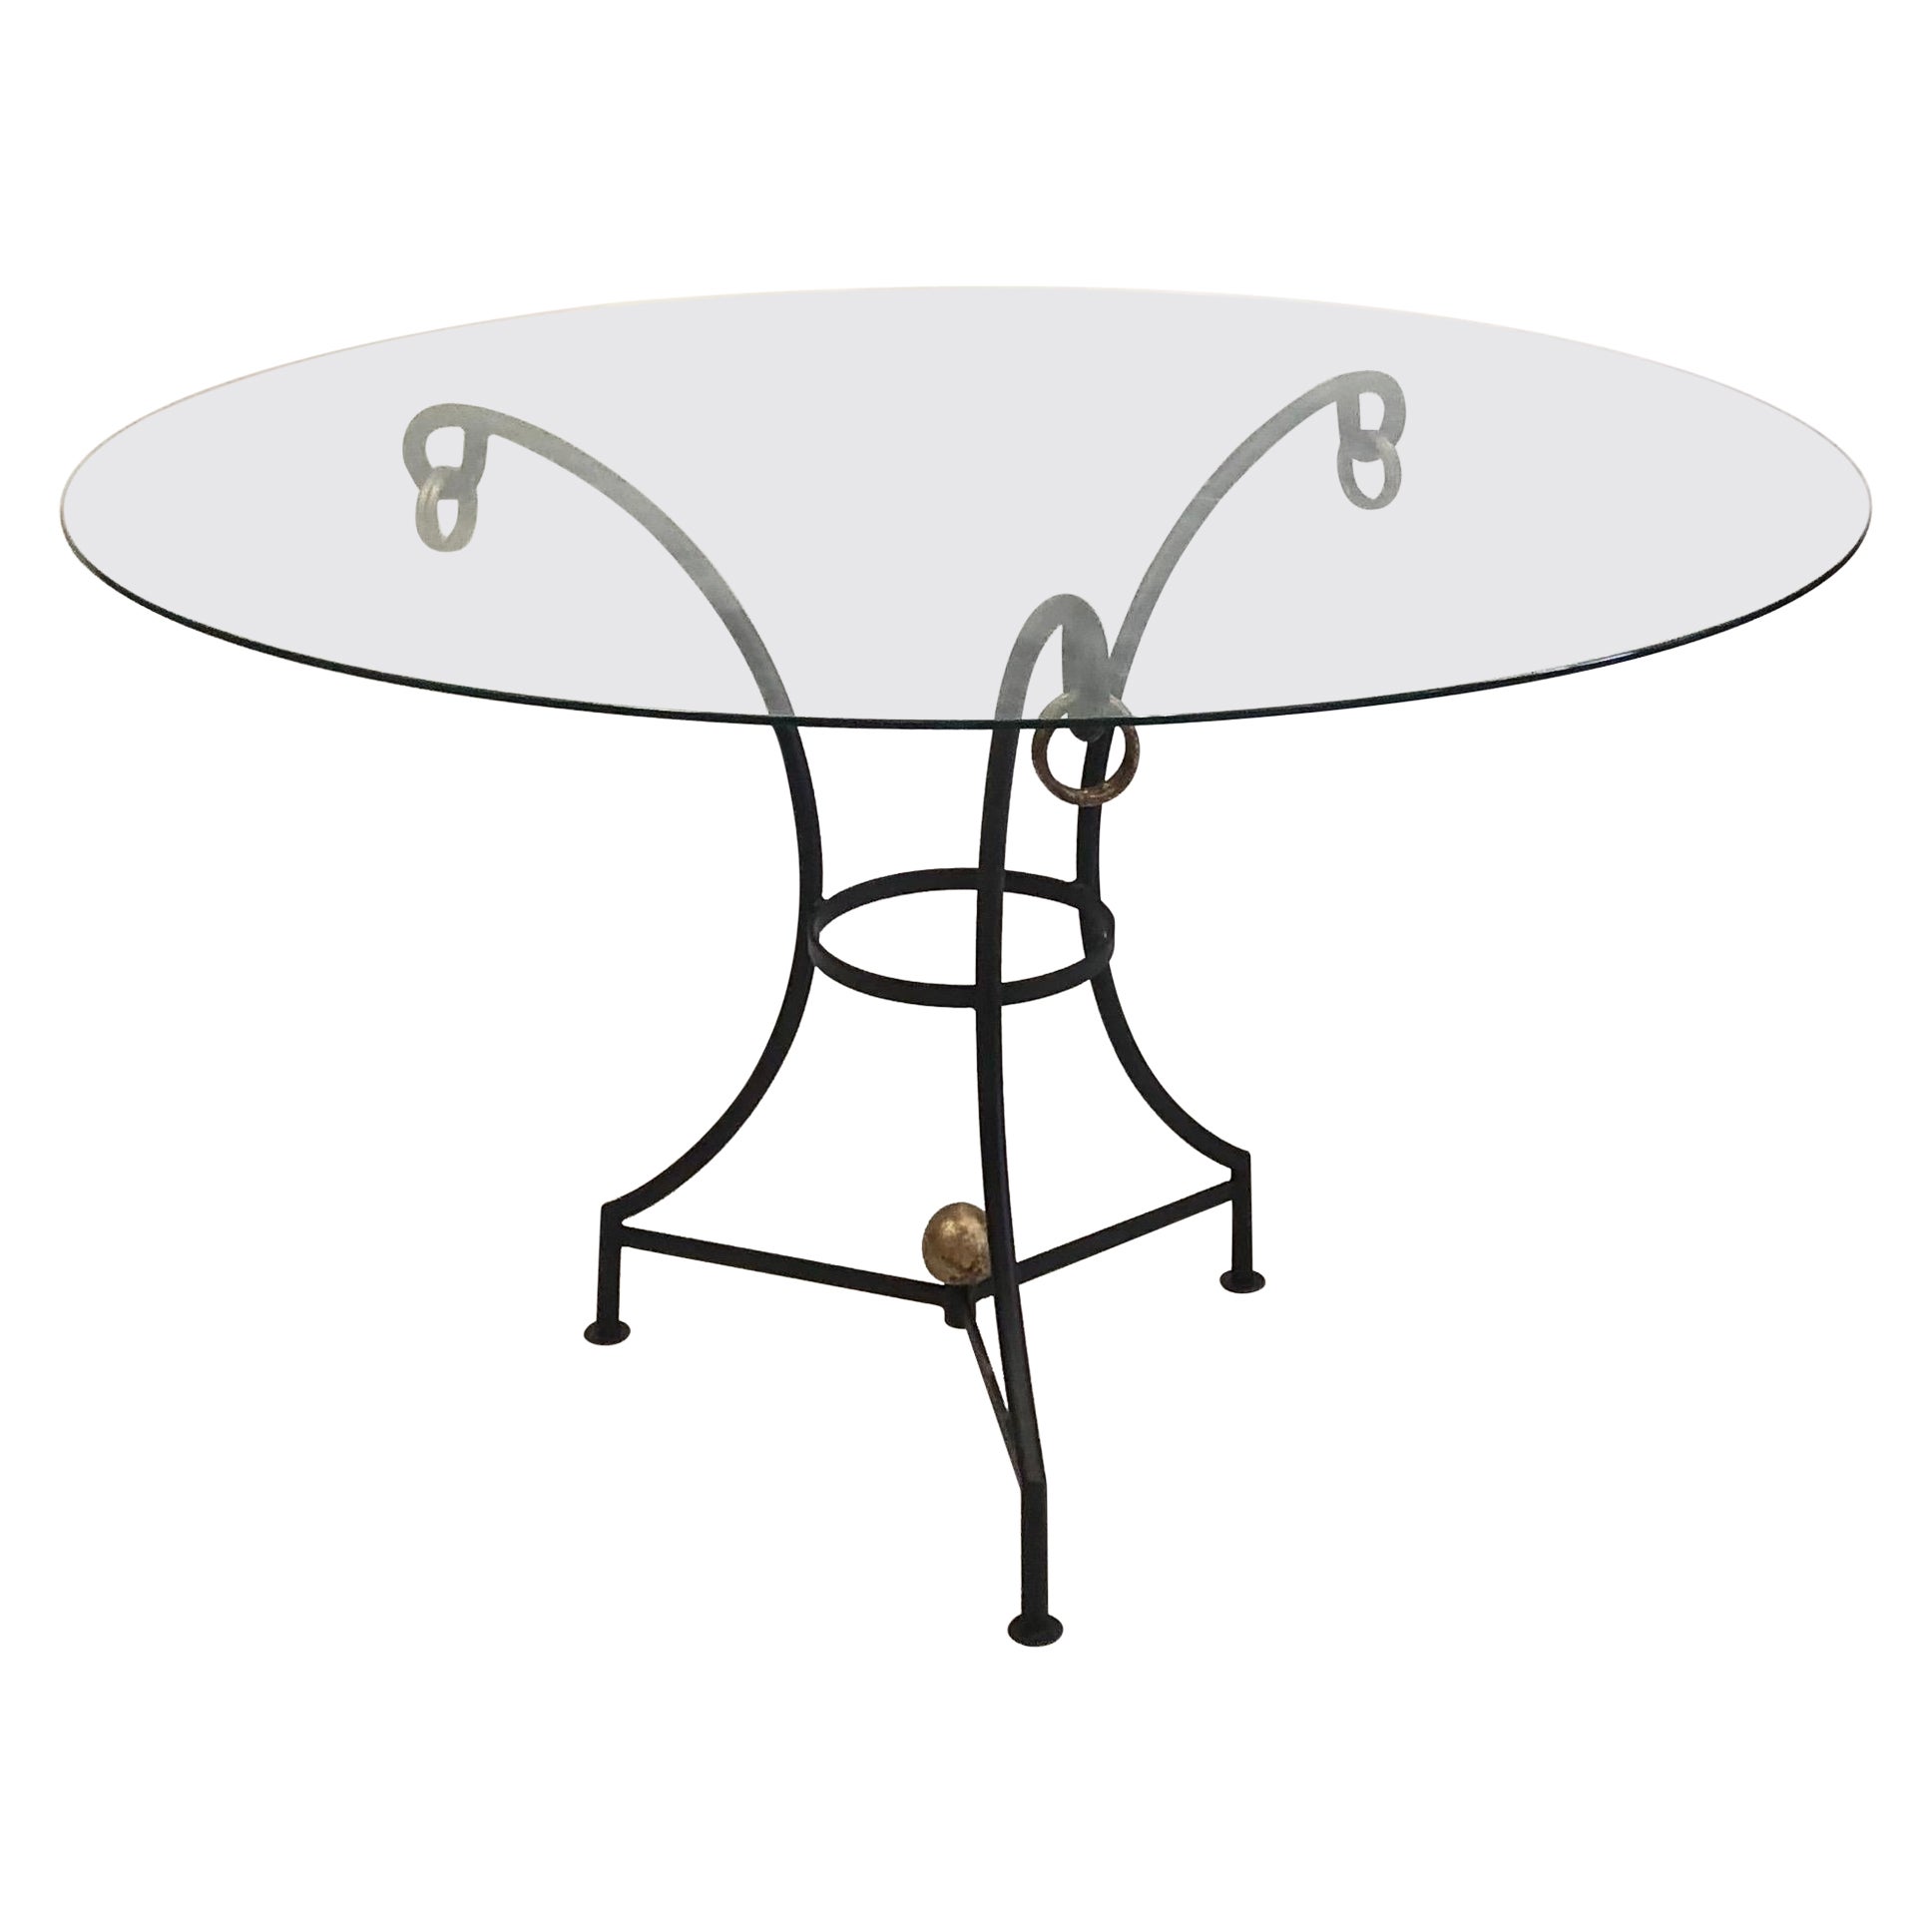 French Modern Neoclassical Wrought Iron Dining / Center Table, Gilbert Poillerat For Sale